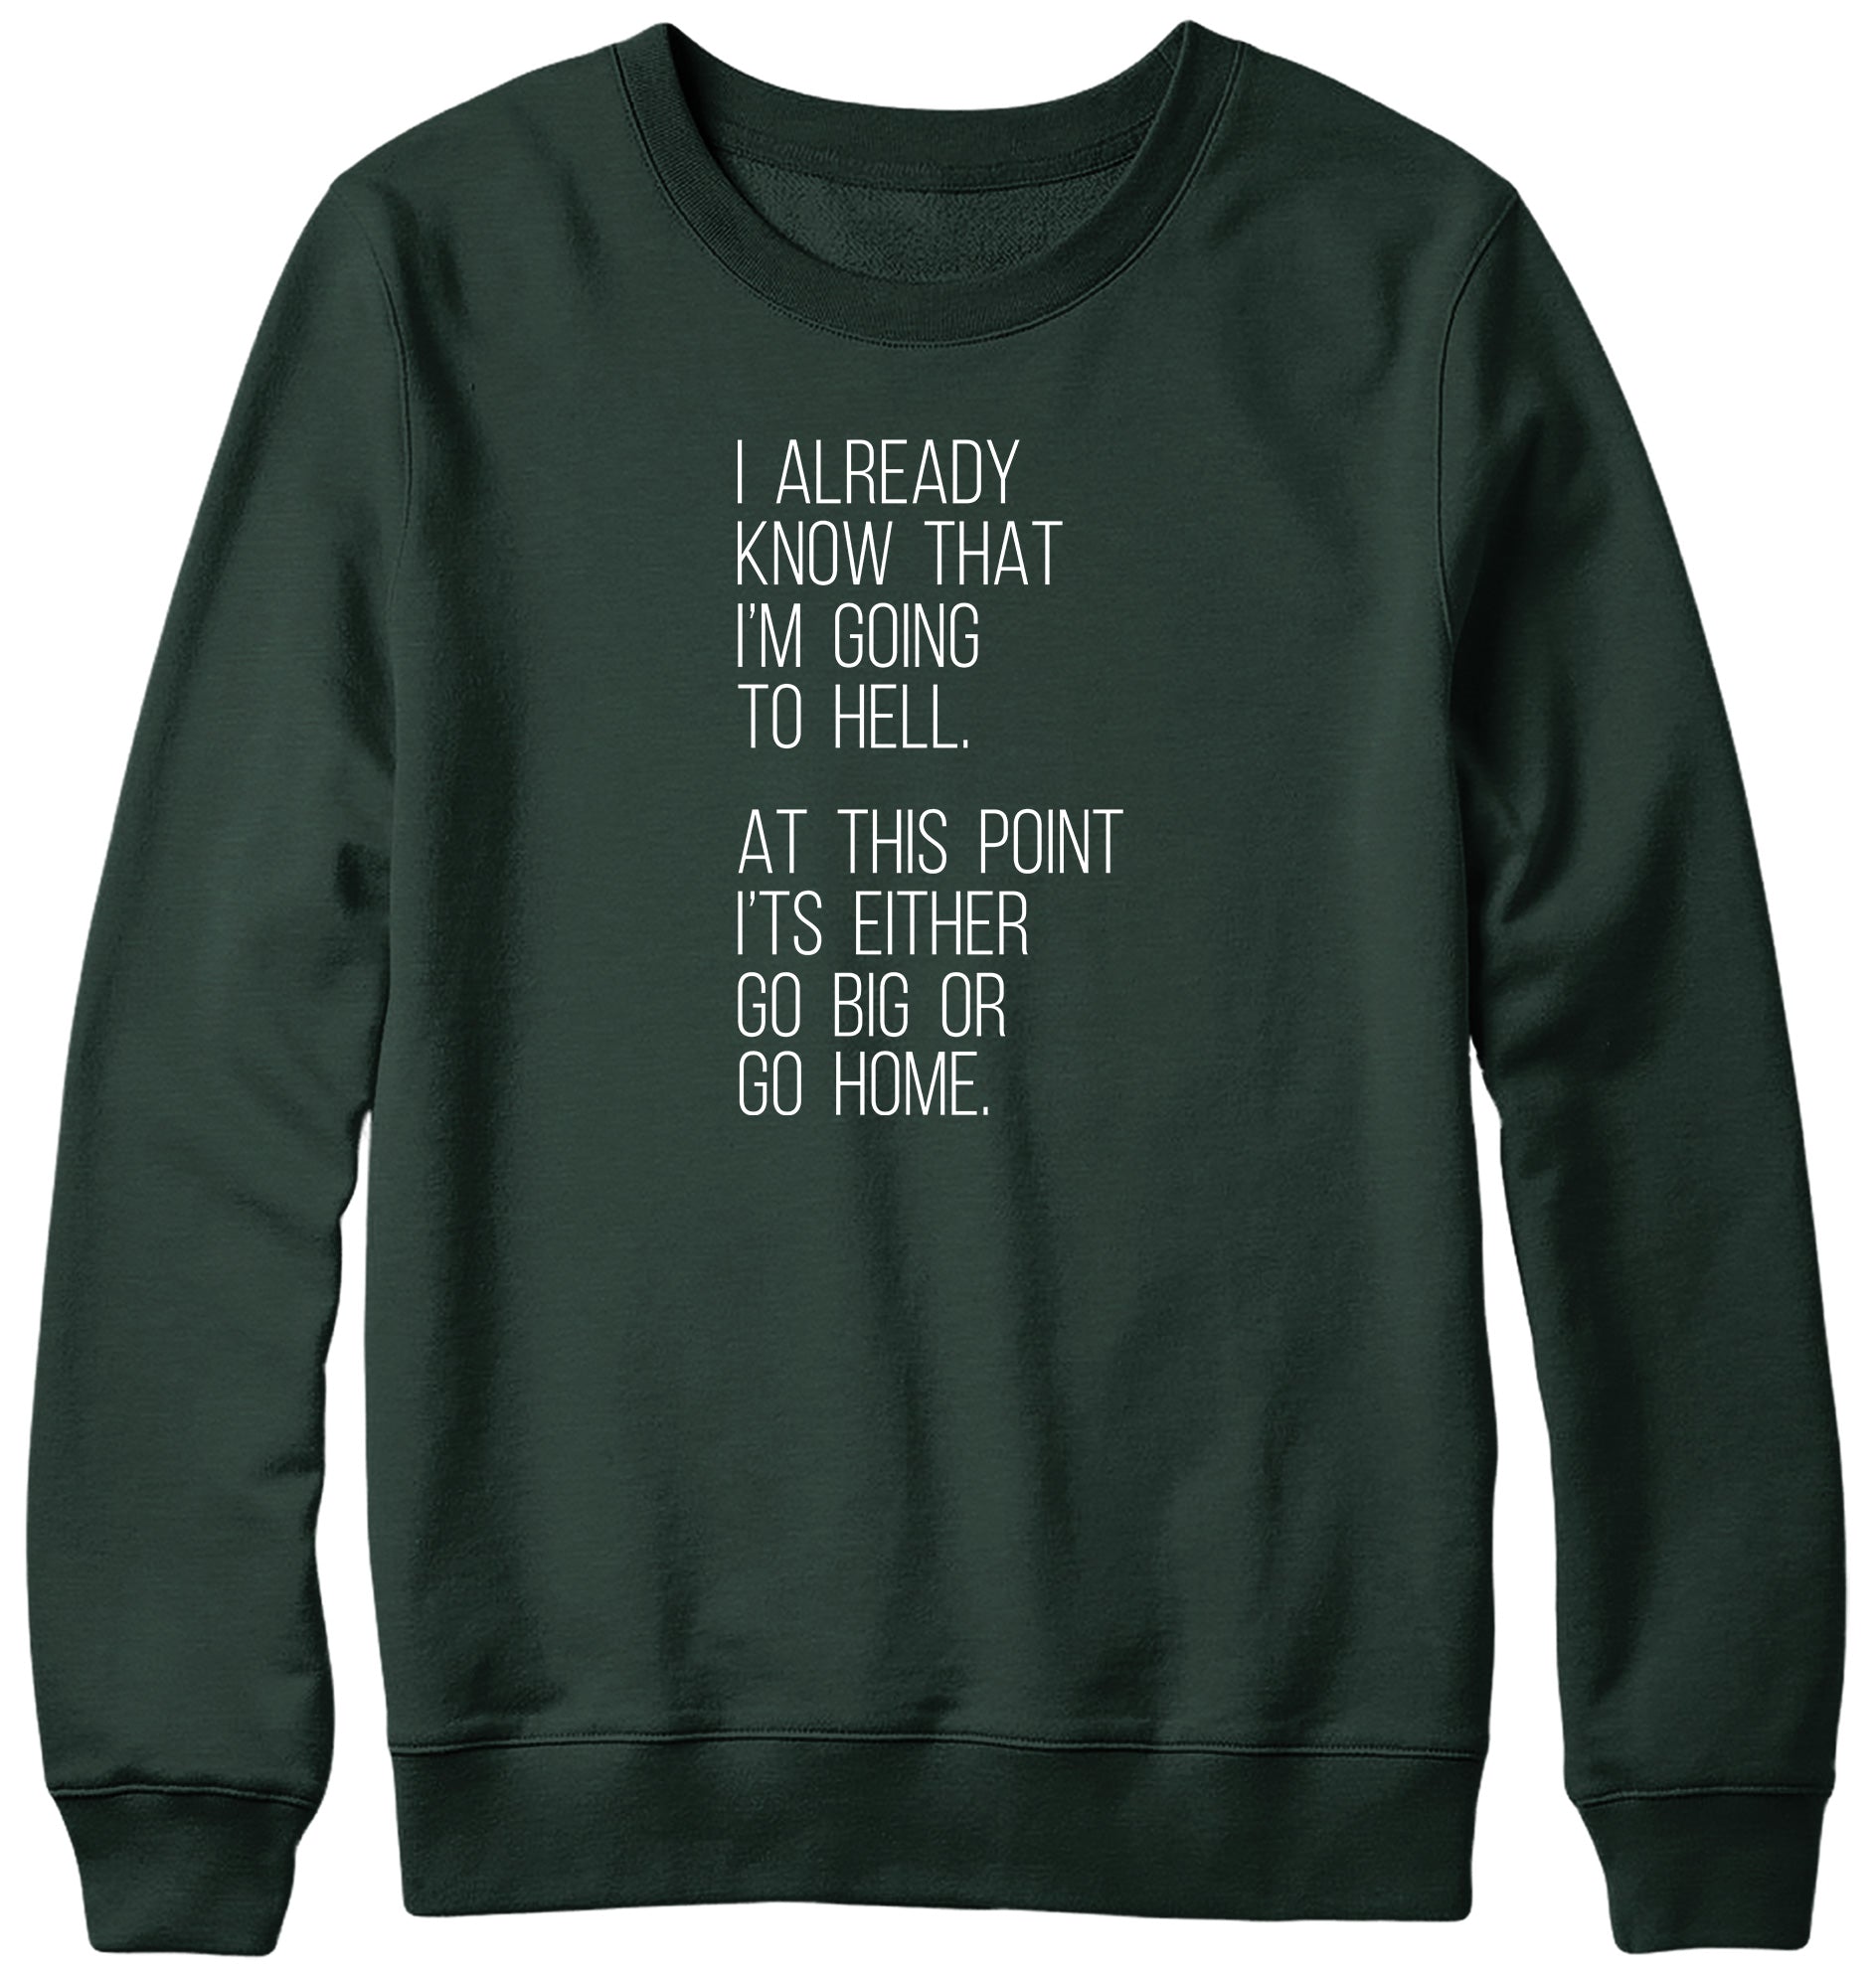 I ALREADY KNOW THAT I'M GOING TO HELL  AT THIS POINT IT'S EITHER GO BIG OR GO HOME WOMENS LADIES MENS UNISEX SWEATSHIRT